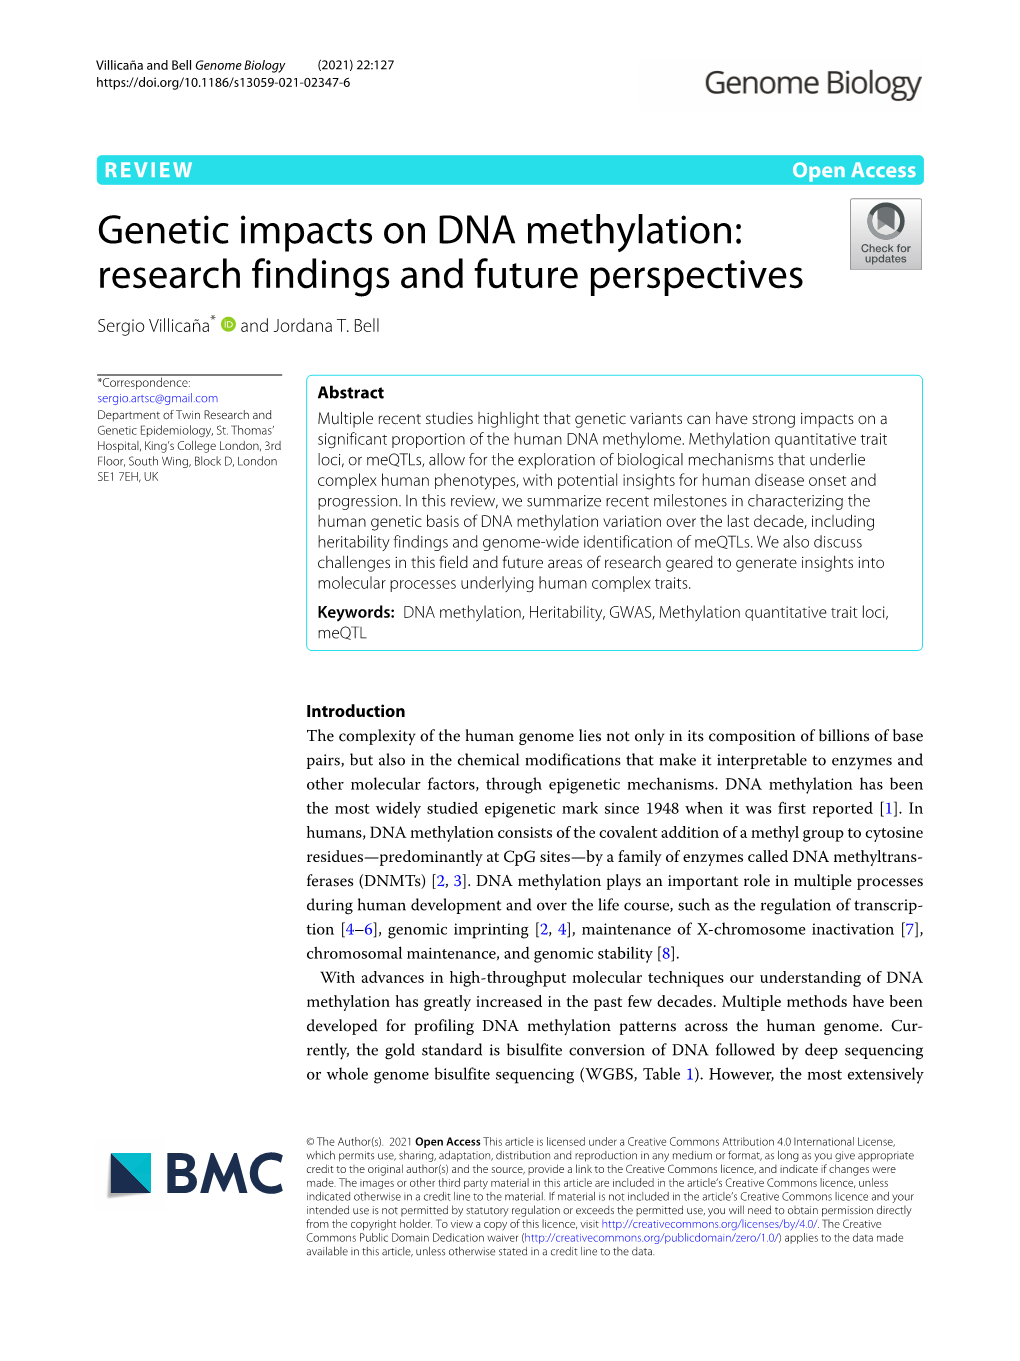 Genetic Impacts on DNA Methylation: Research Findings and Future Perspectives